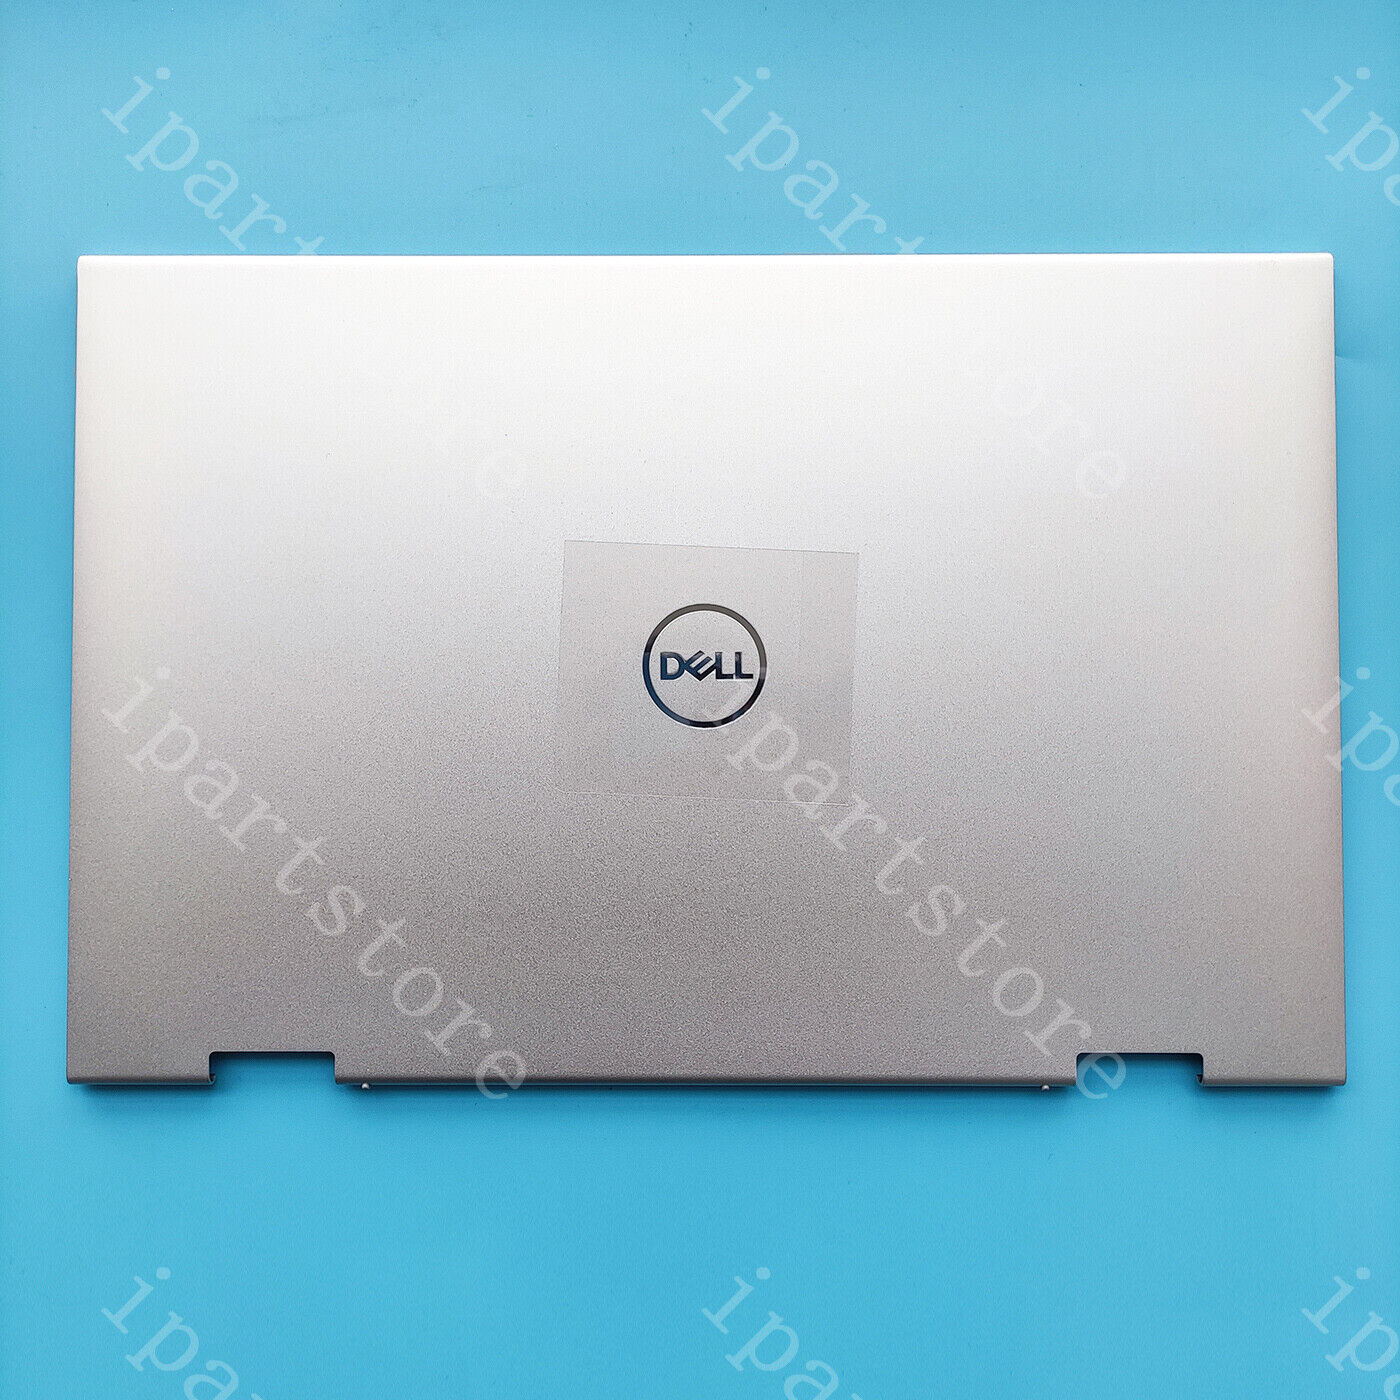 New Lcd Rear Back Cover Top Case For Dell Inspiron 5410 7415 2-in-1 0NRGDR NRGDR